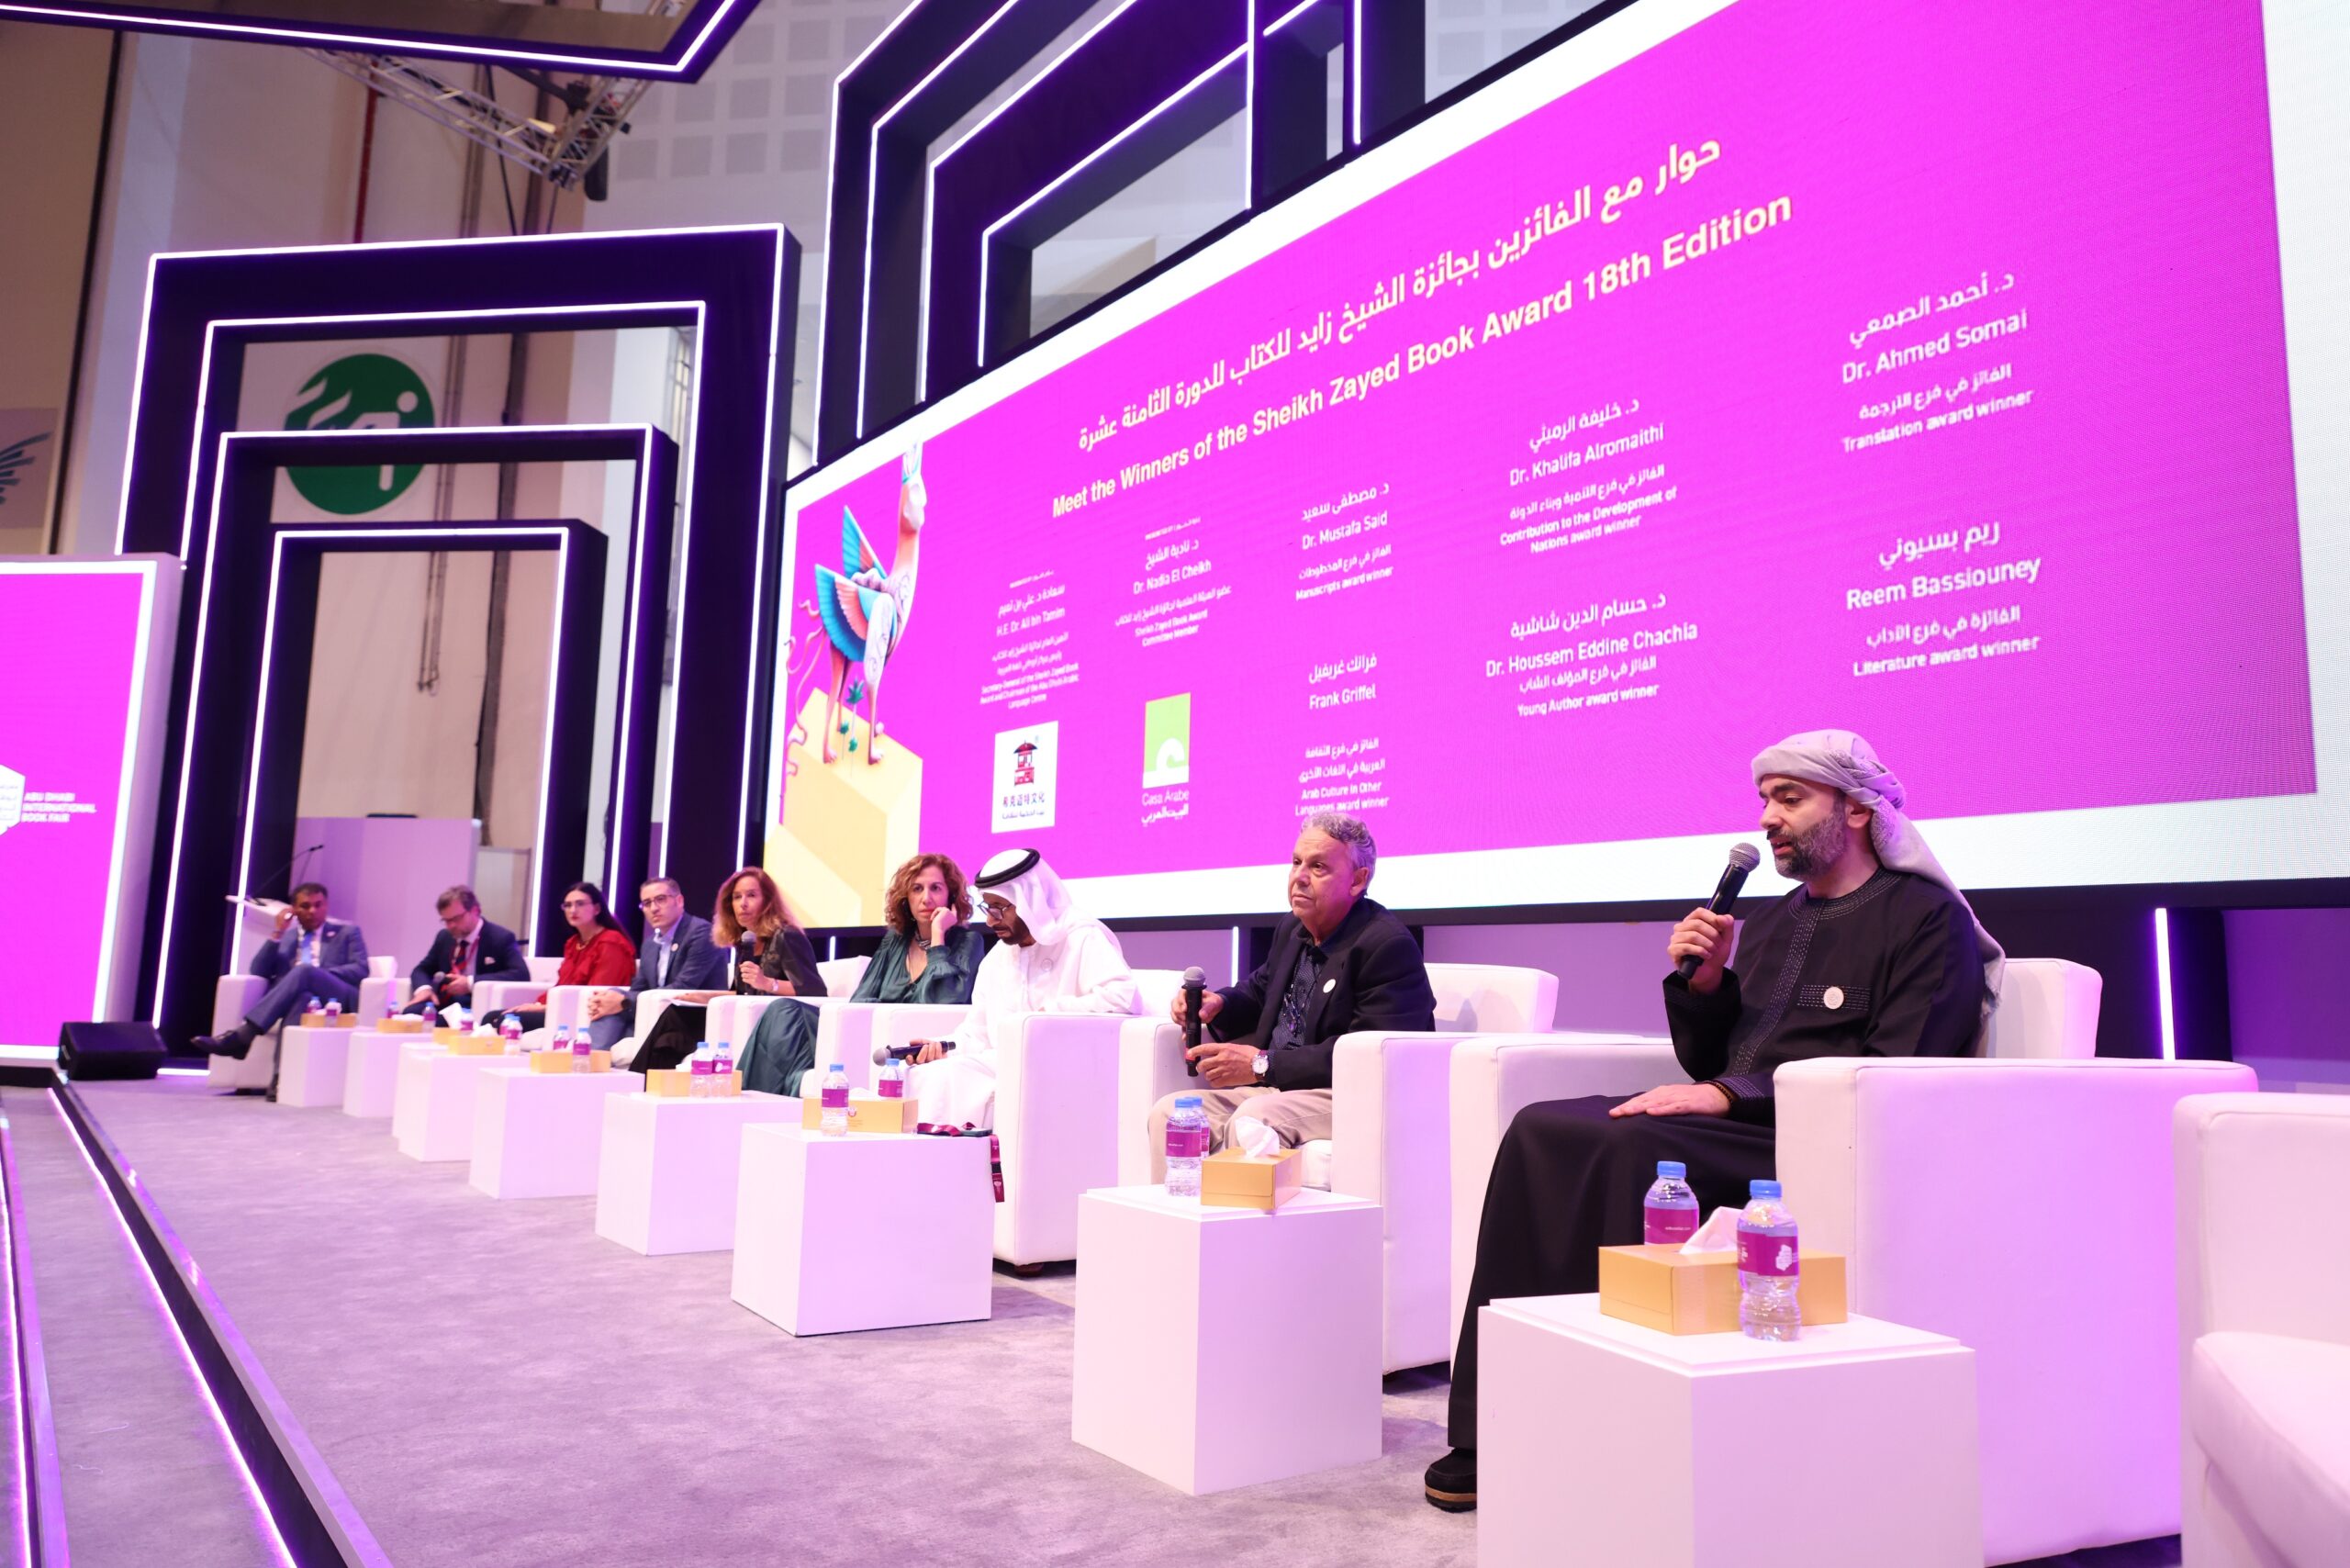 Winners of the Sheikh Zayed Book Award Share Literary Excerpts with Audience at Abu Dhabi International Book Fair